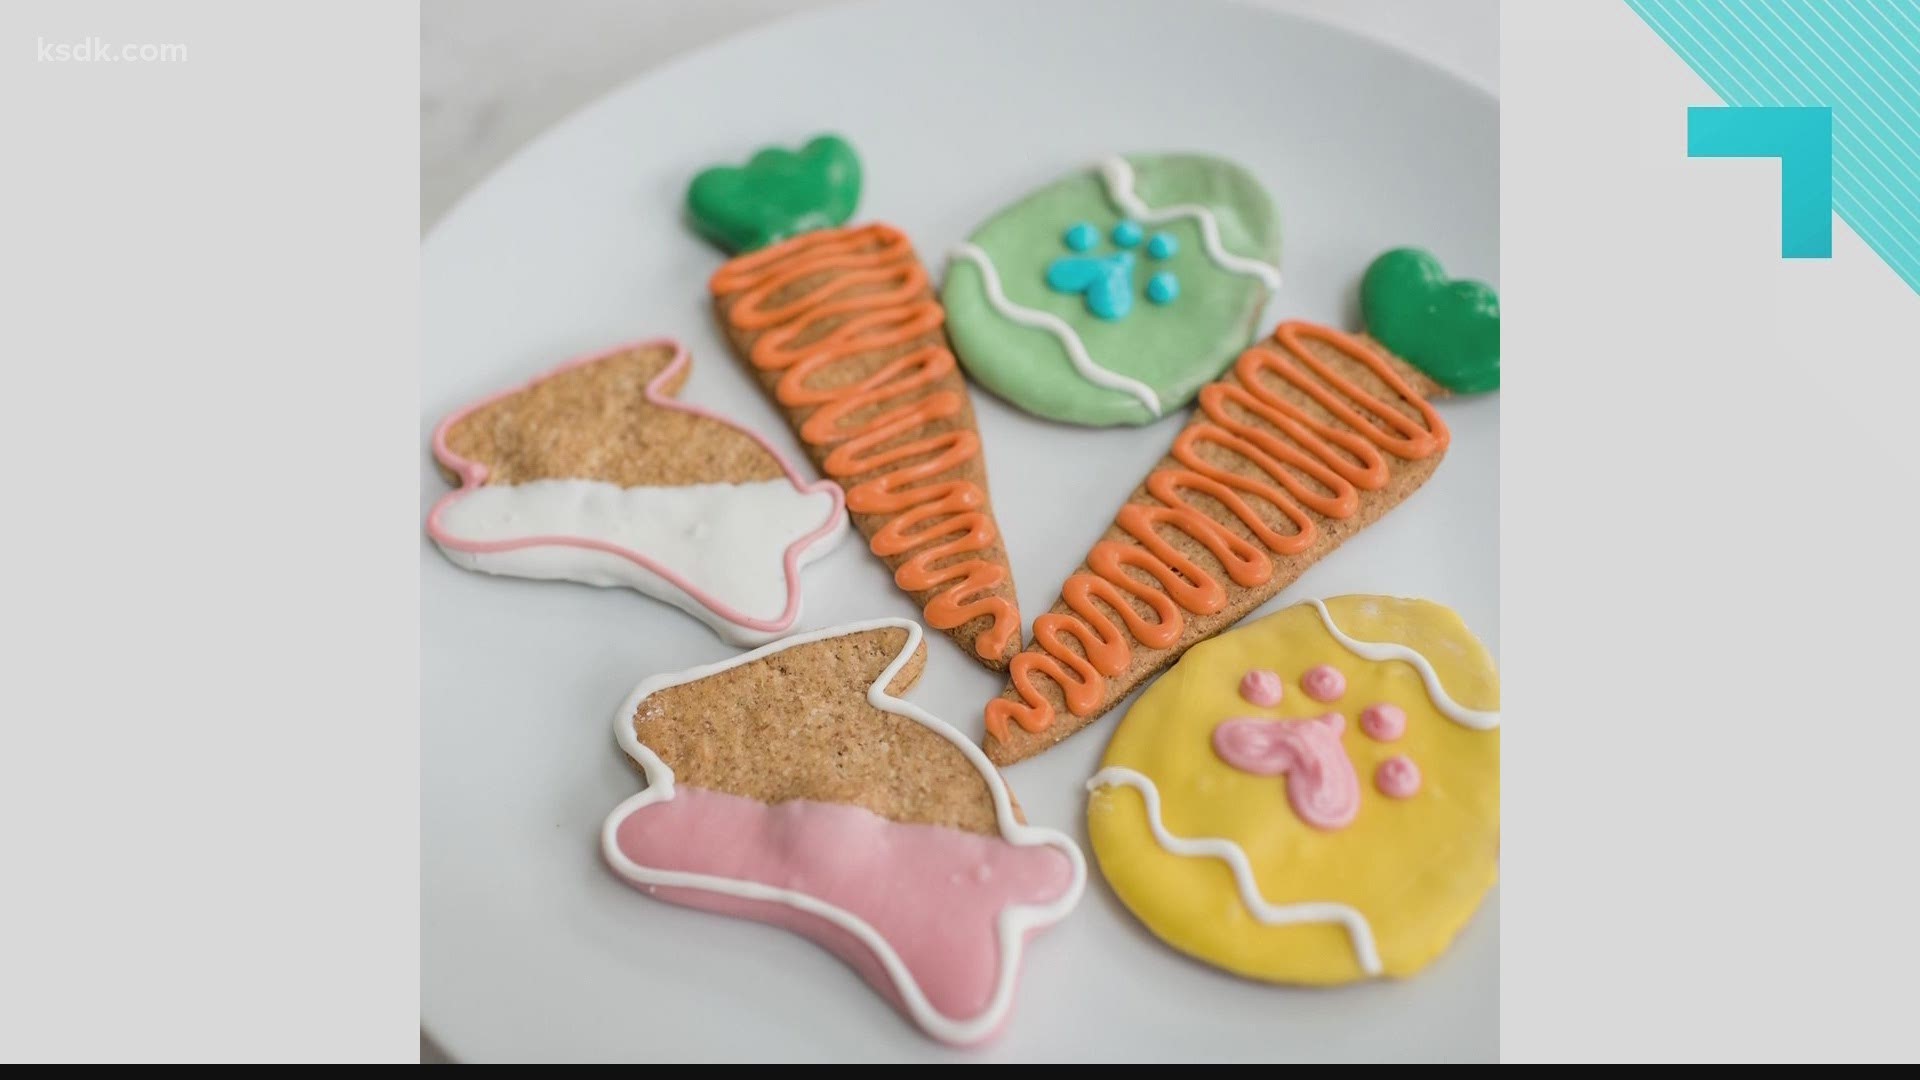 Treats Unleashed has everything pet parents need to celebrate Easter with their animals.